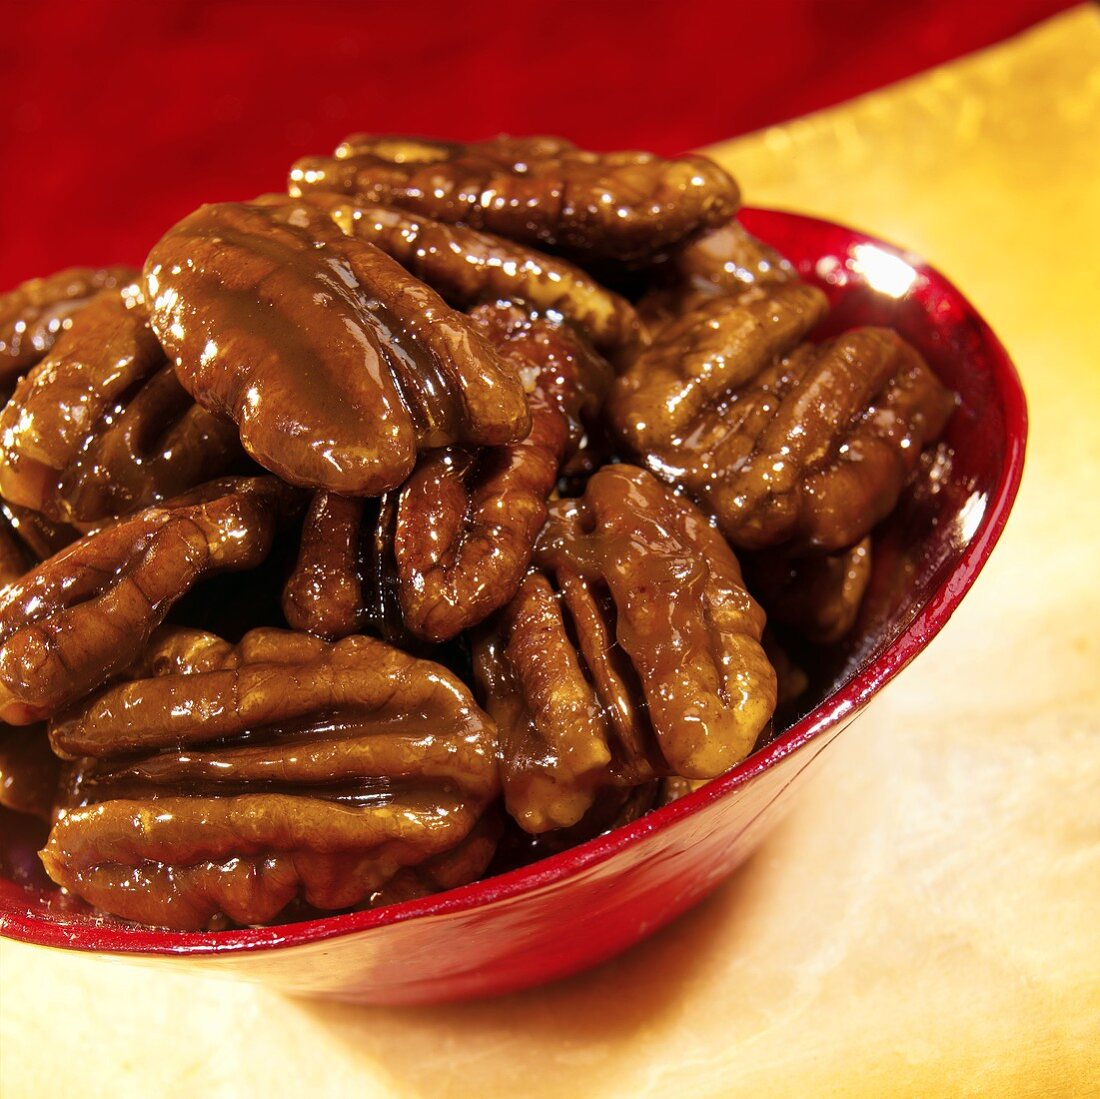 Caramelised pecan nuts in a red bowl